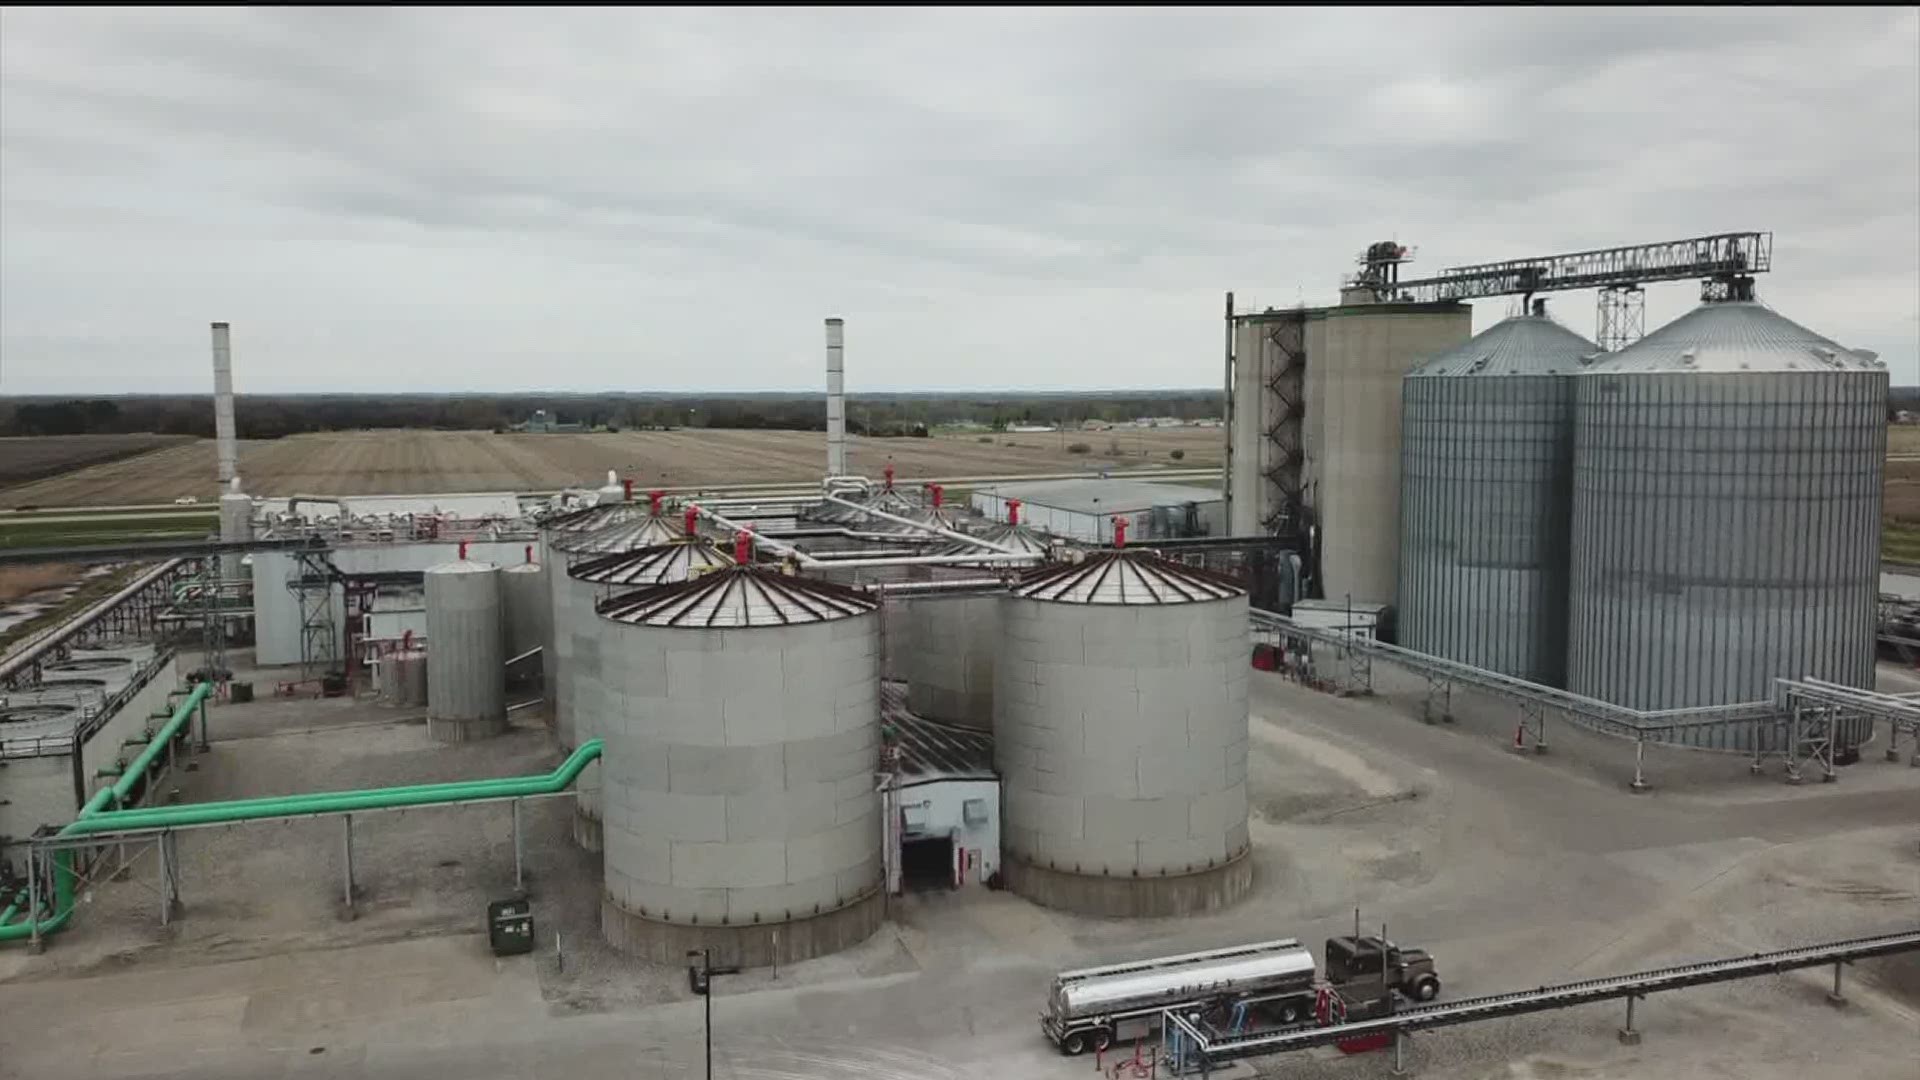 Big River Resources cut back 1/3 of production due to less ethanol demand.  They say if low demand continues, they may make some plants go idle.